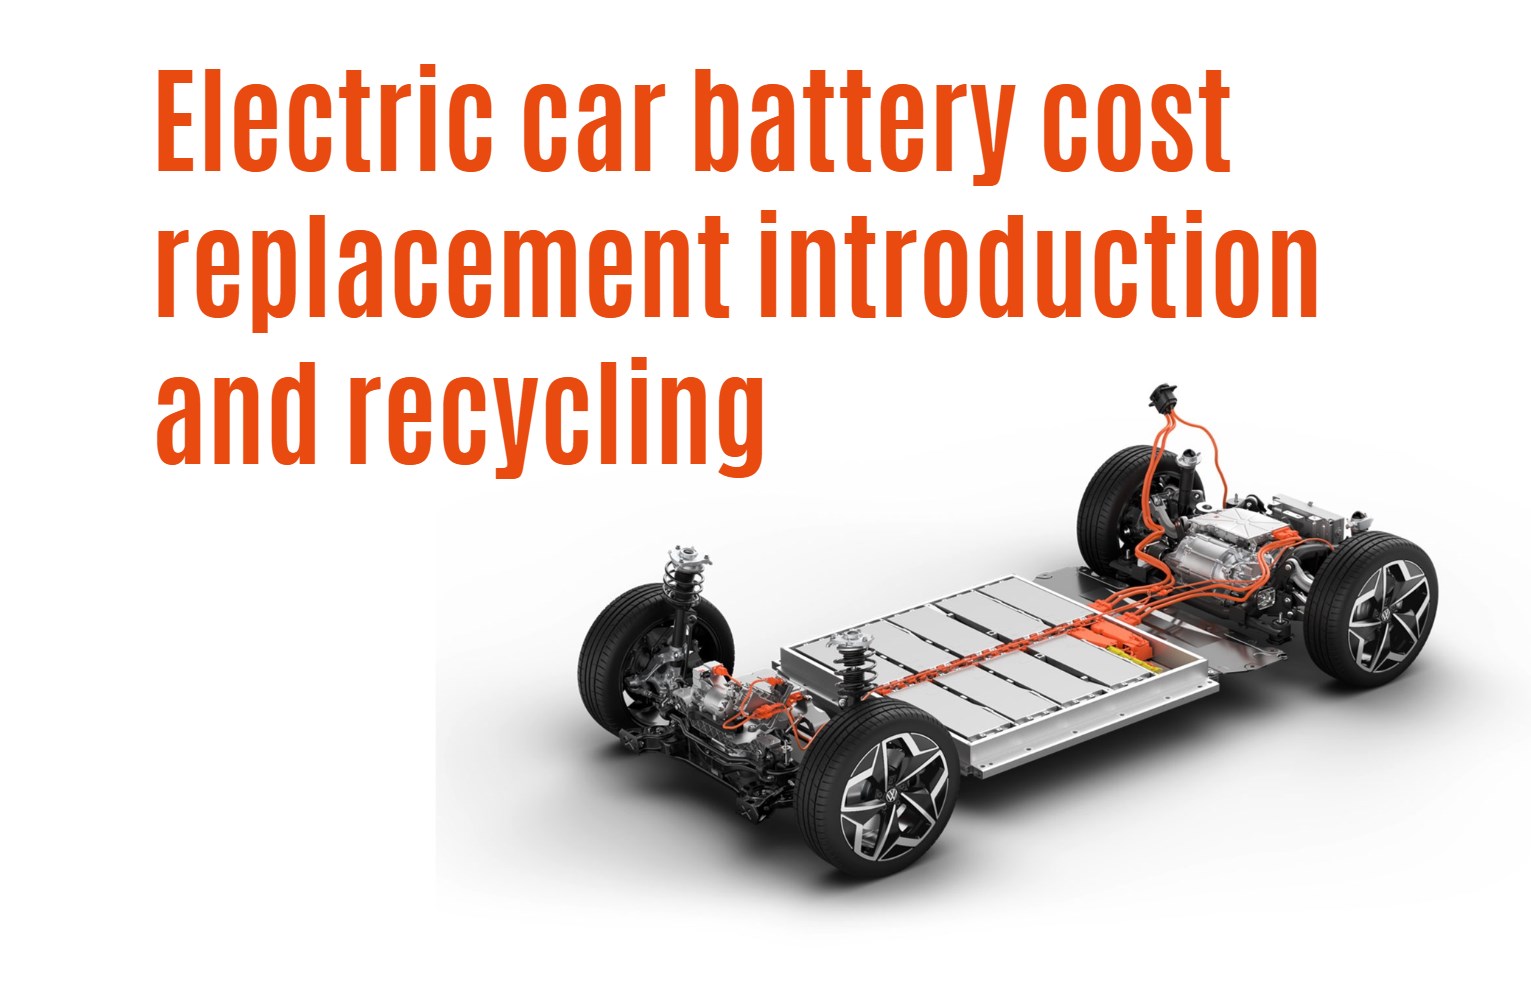 Electric car battery cost replacement introduction and recycling